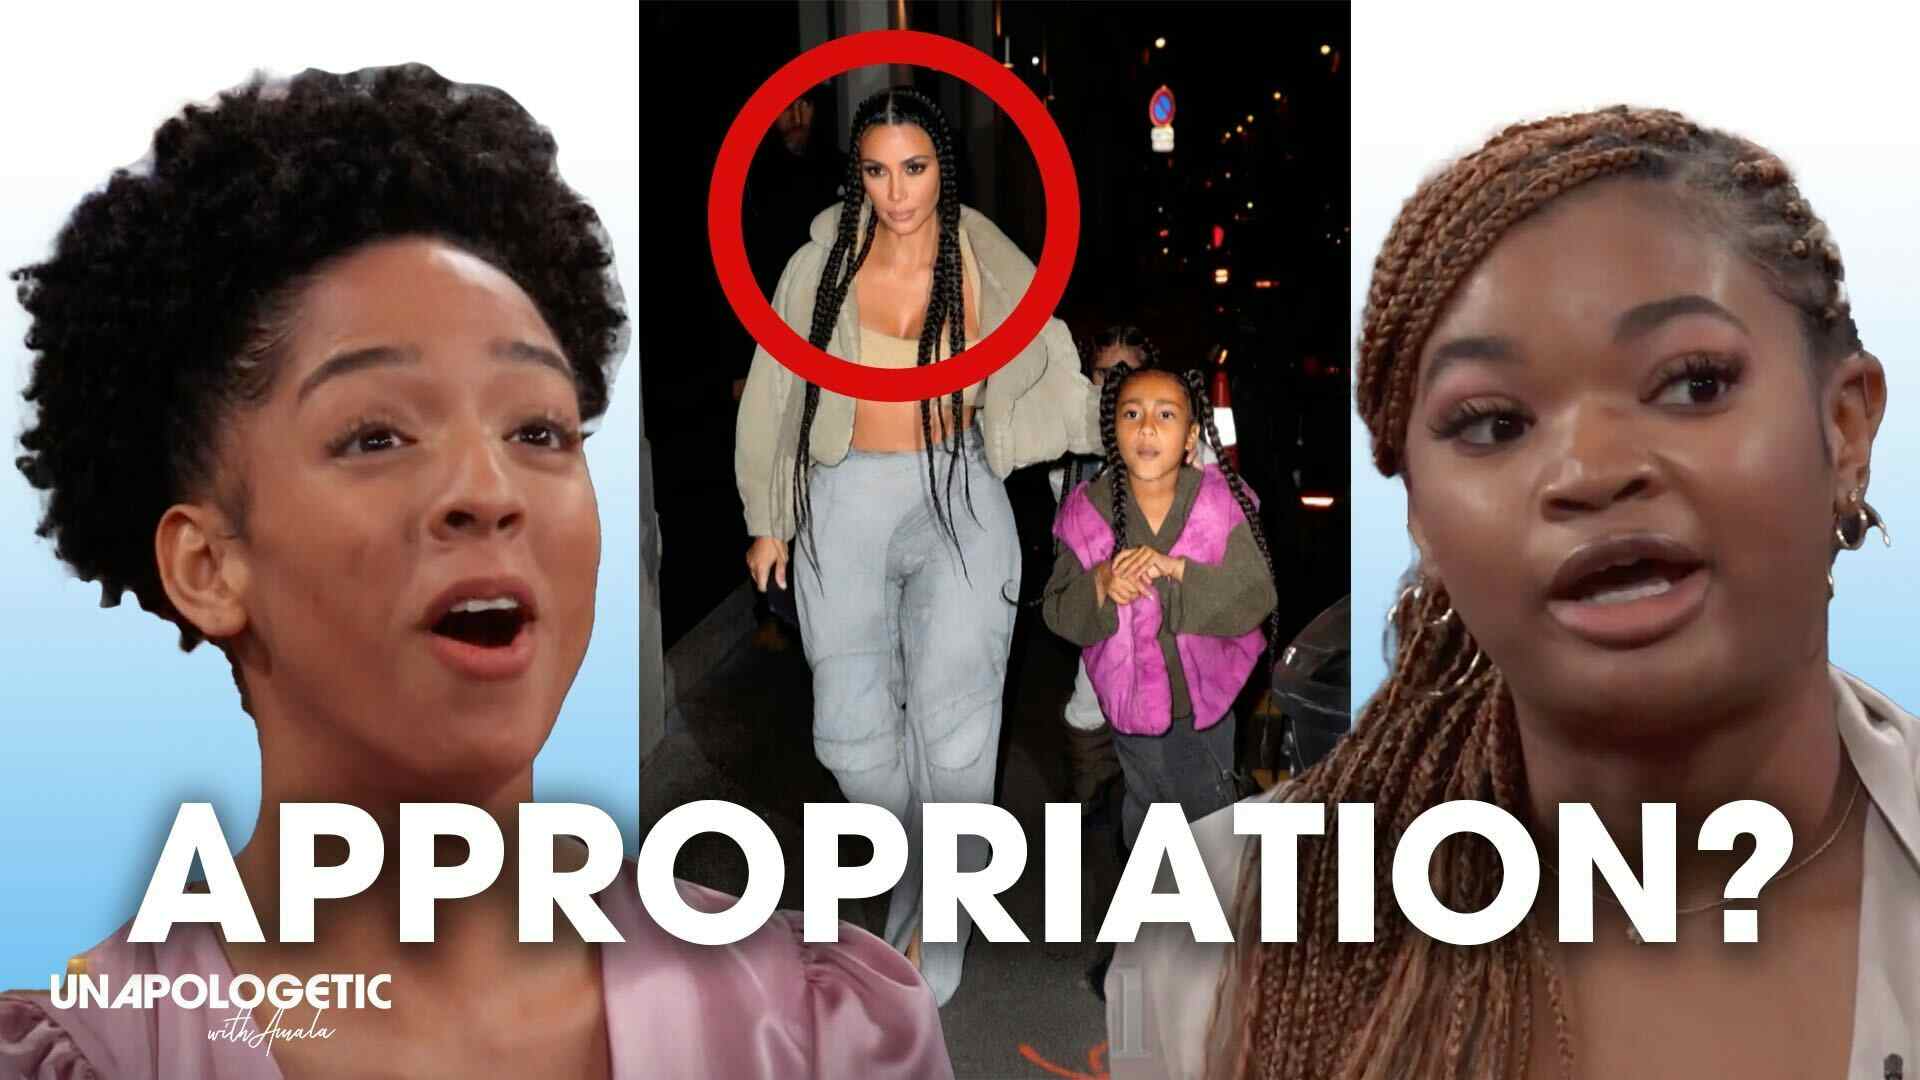 Everyone Needs To CHILL On "Cultural Appropriation"